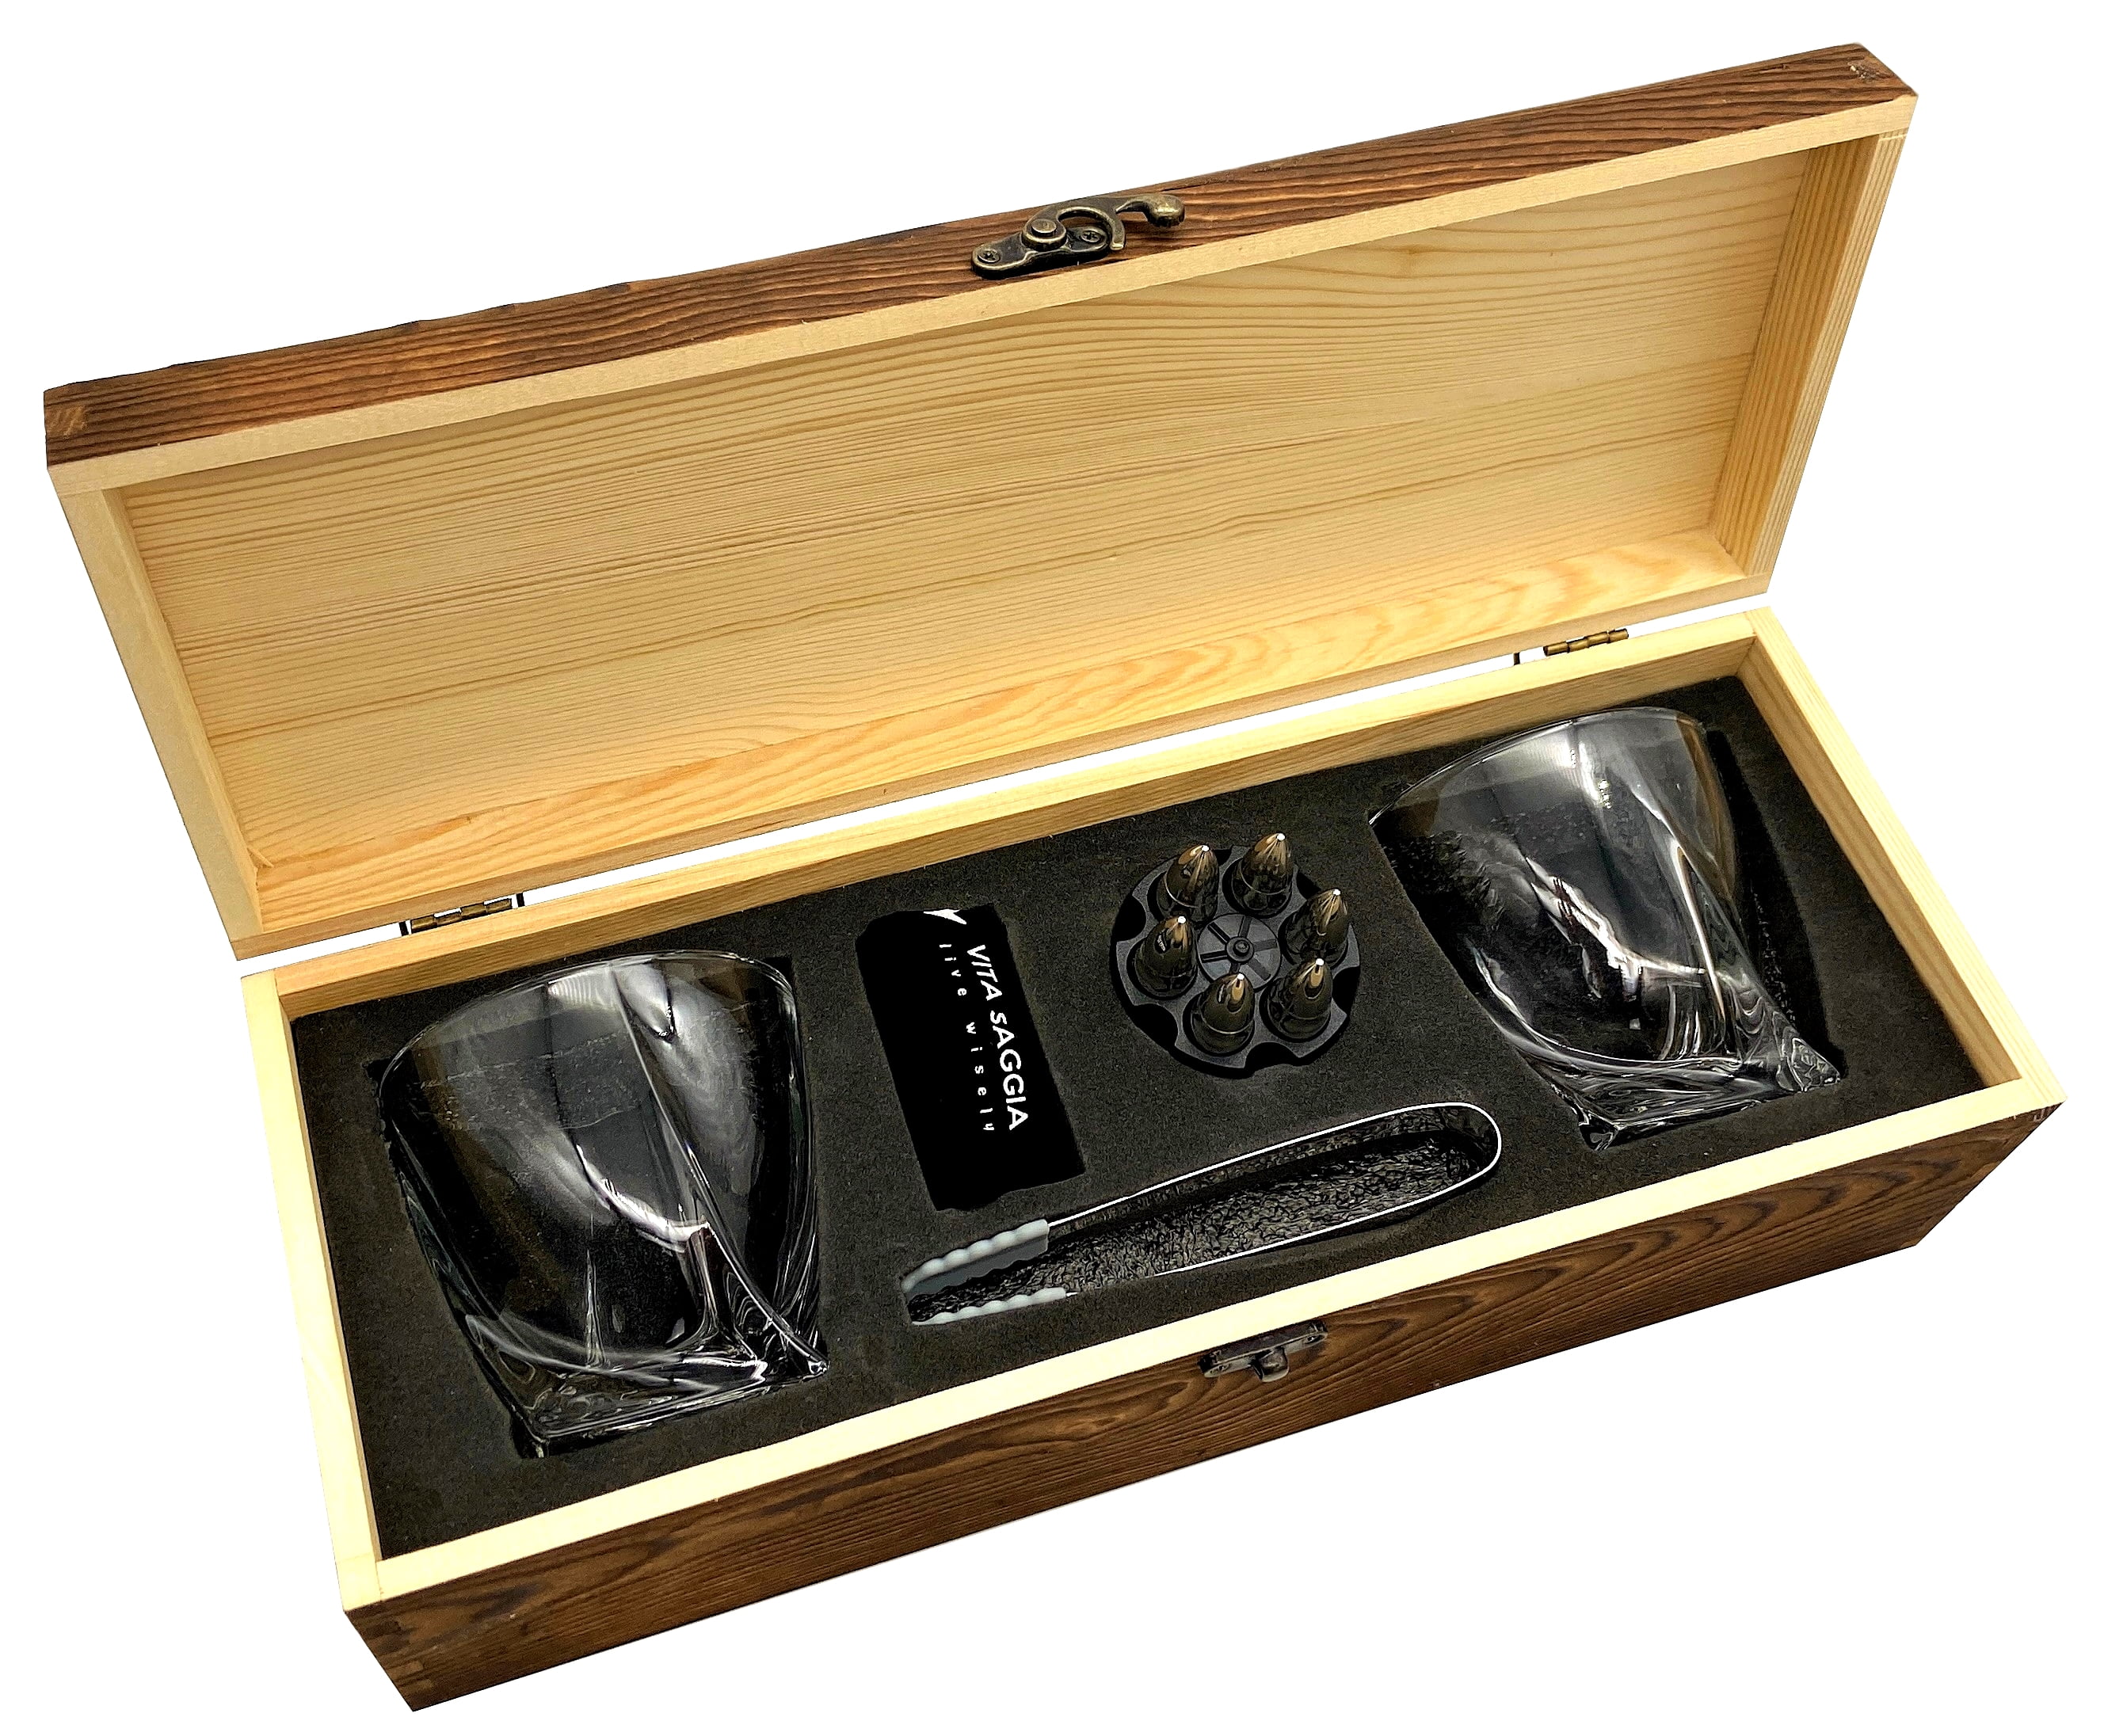 Cool Stones Whiskey Glass Gift Set - 2 Whiskey Glasses and Whiskey Stones  with Tongs in Velvet Bag All Presented in an Elegant Wooden Box for Men